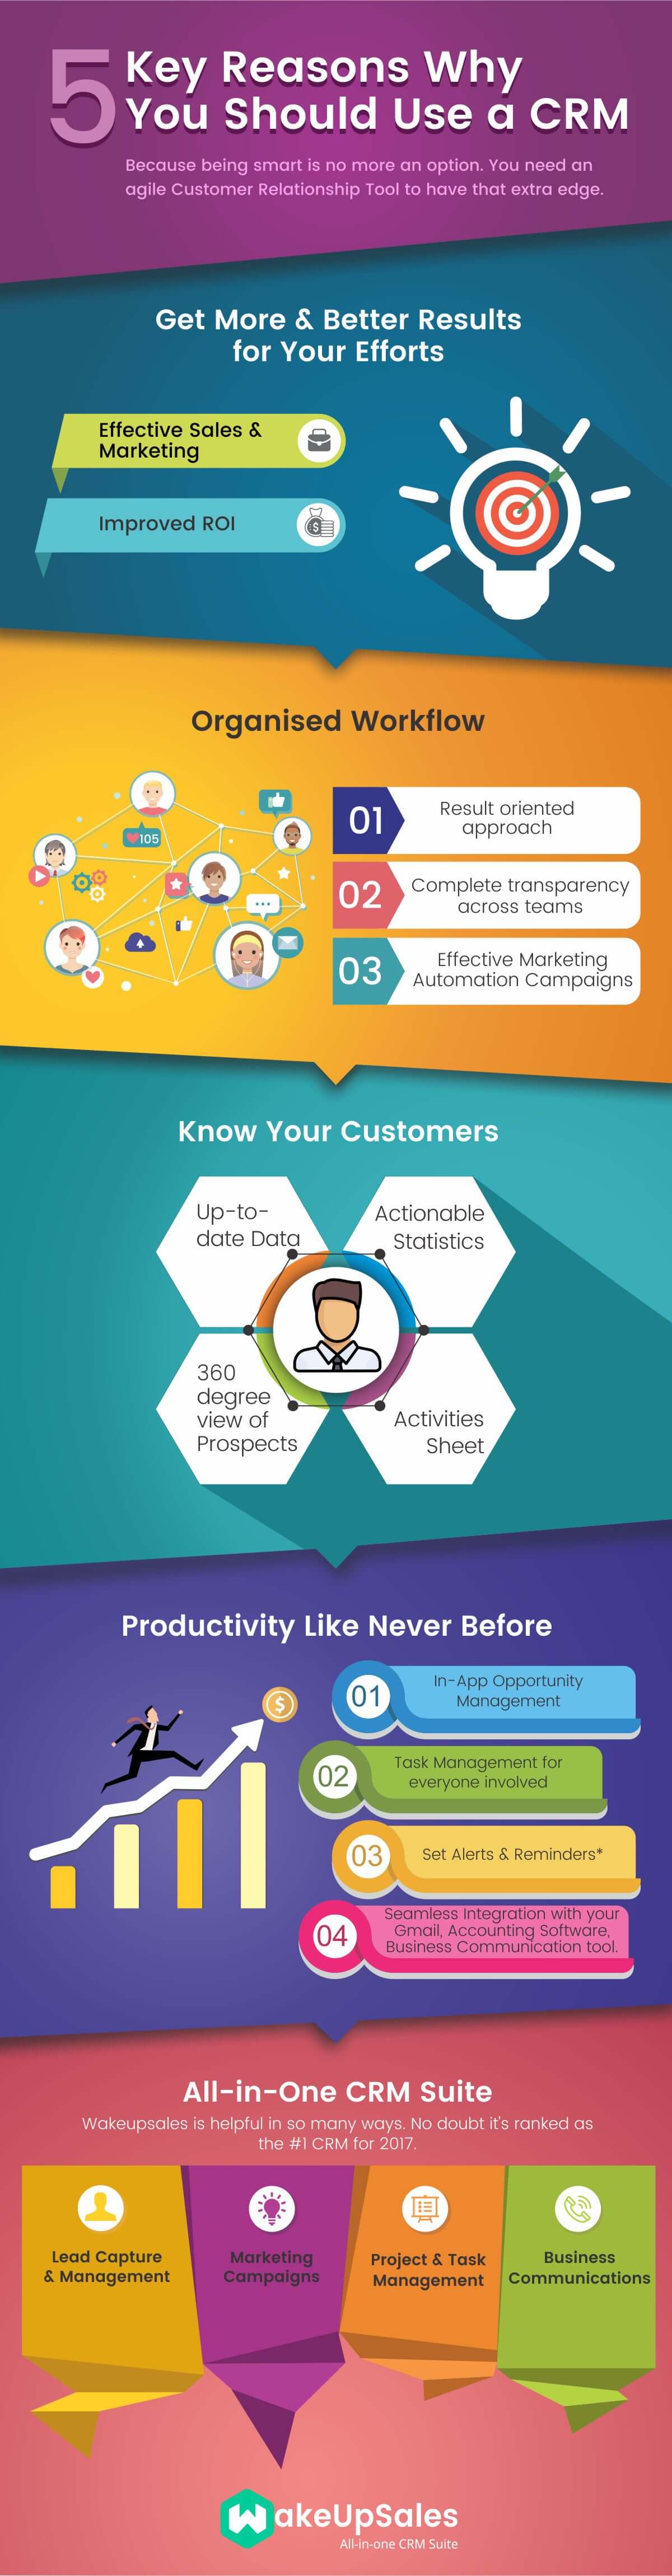 5 Key Reasons Why You Should Use a CRM infographic5 Key Reasons You Should Use a CRM